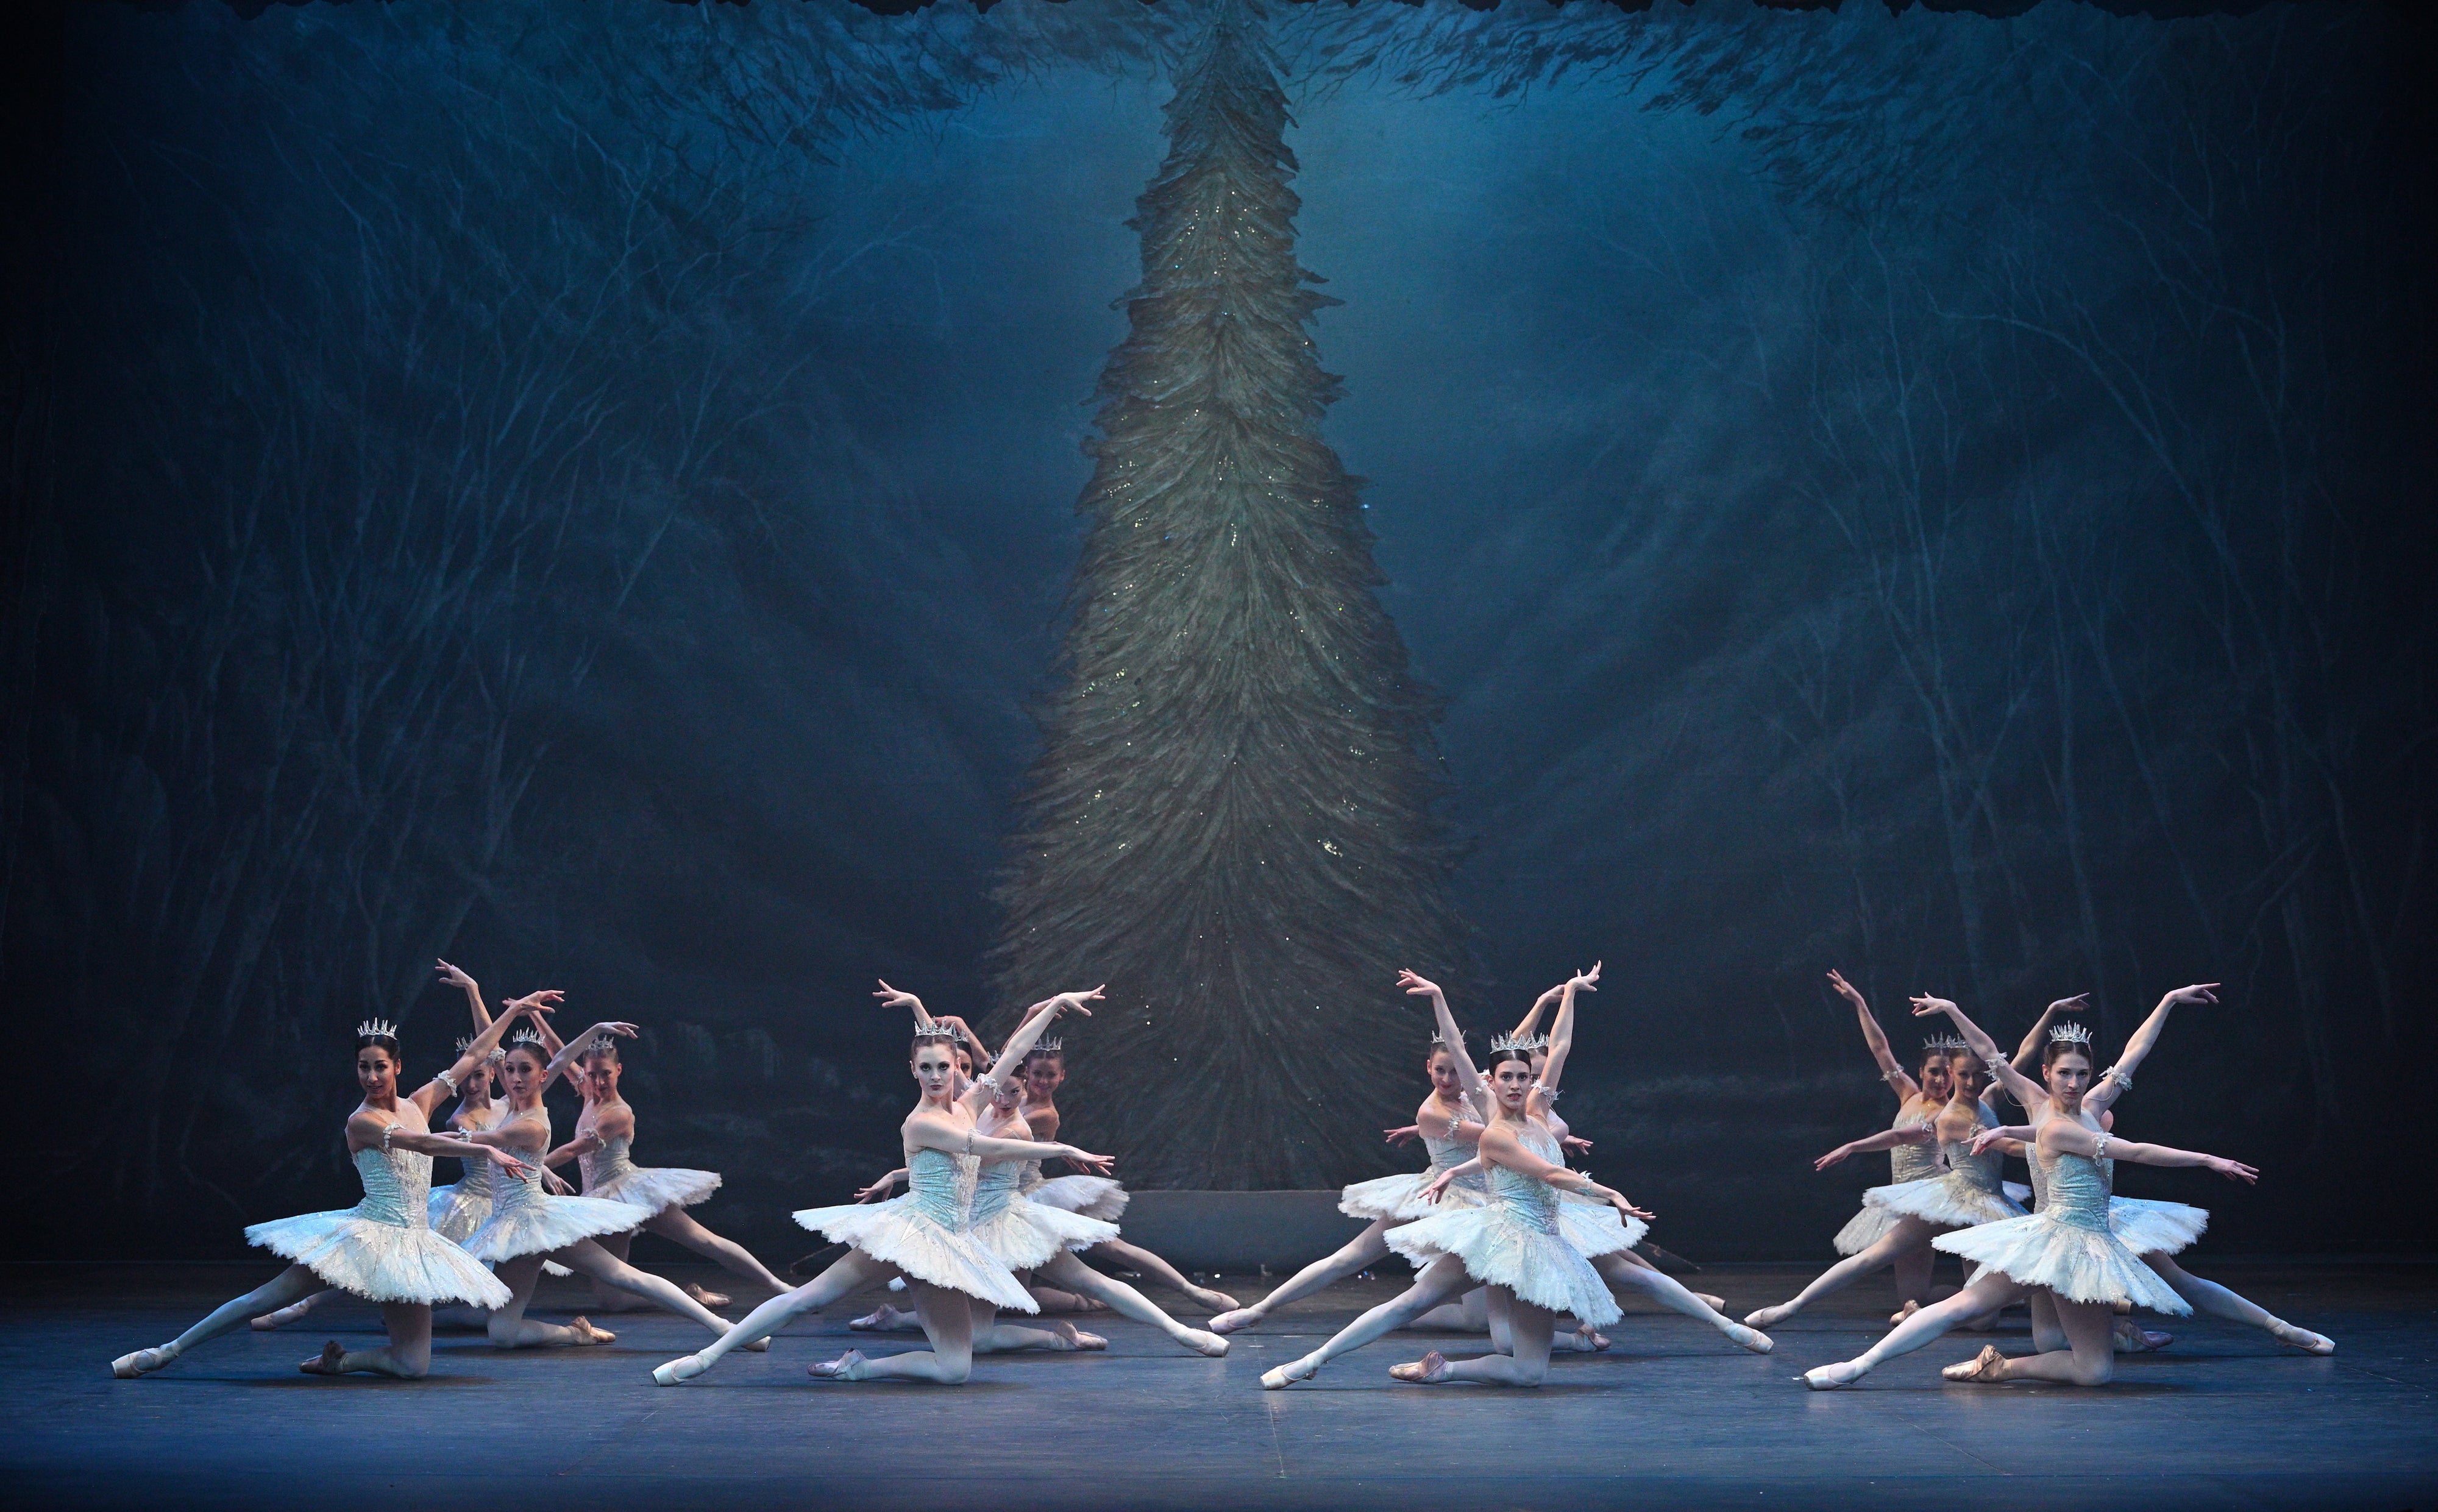 The Nutcracker is a tried and tested winter treat